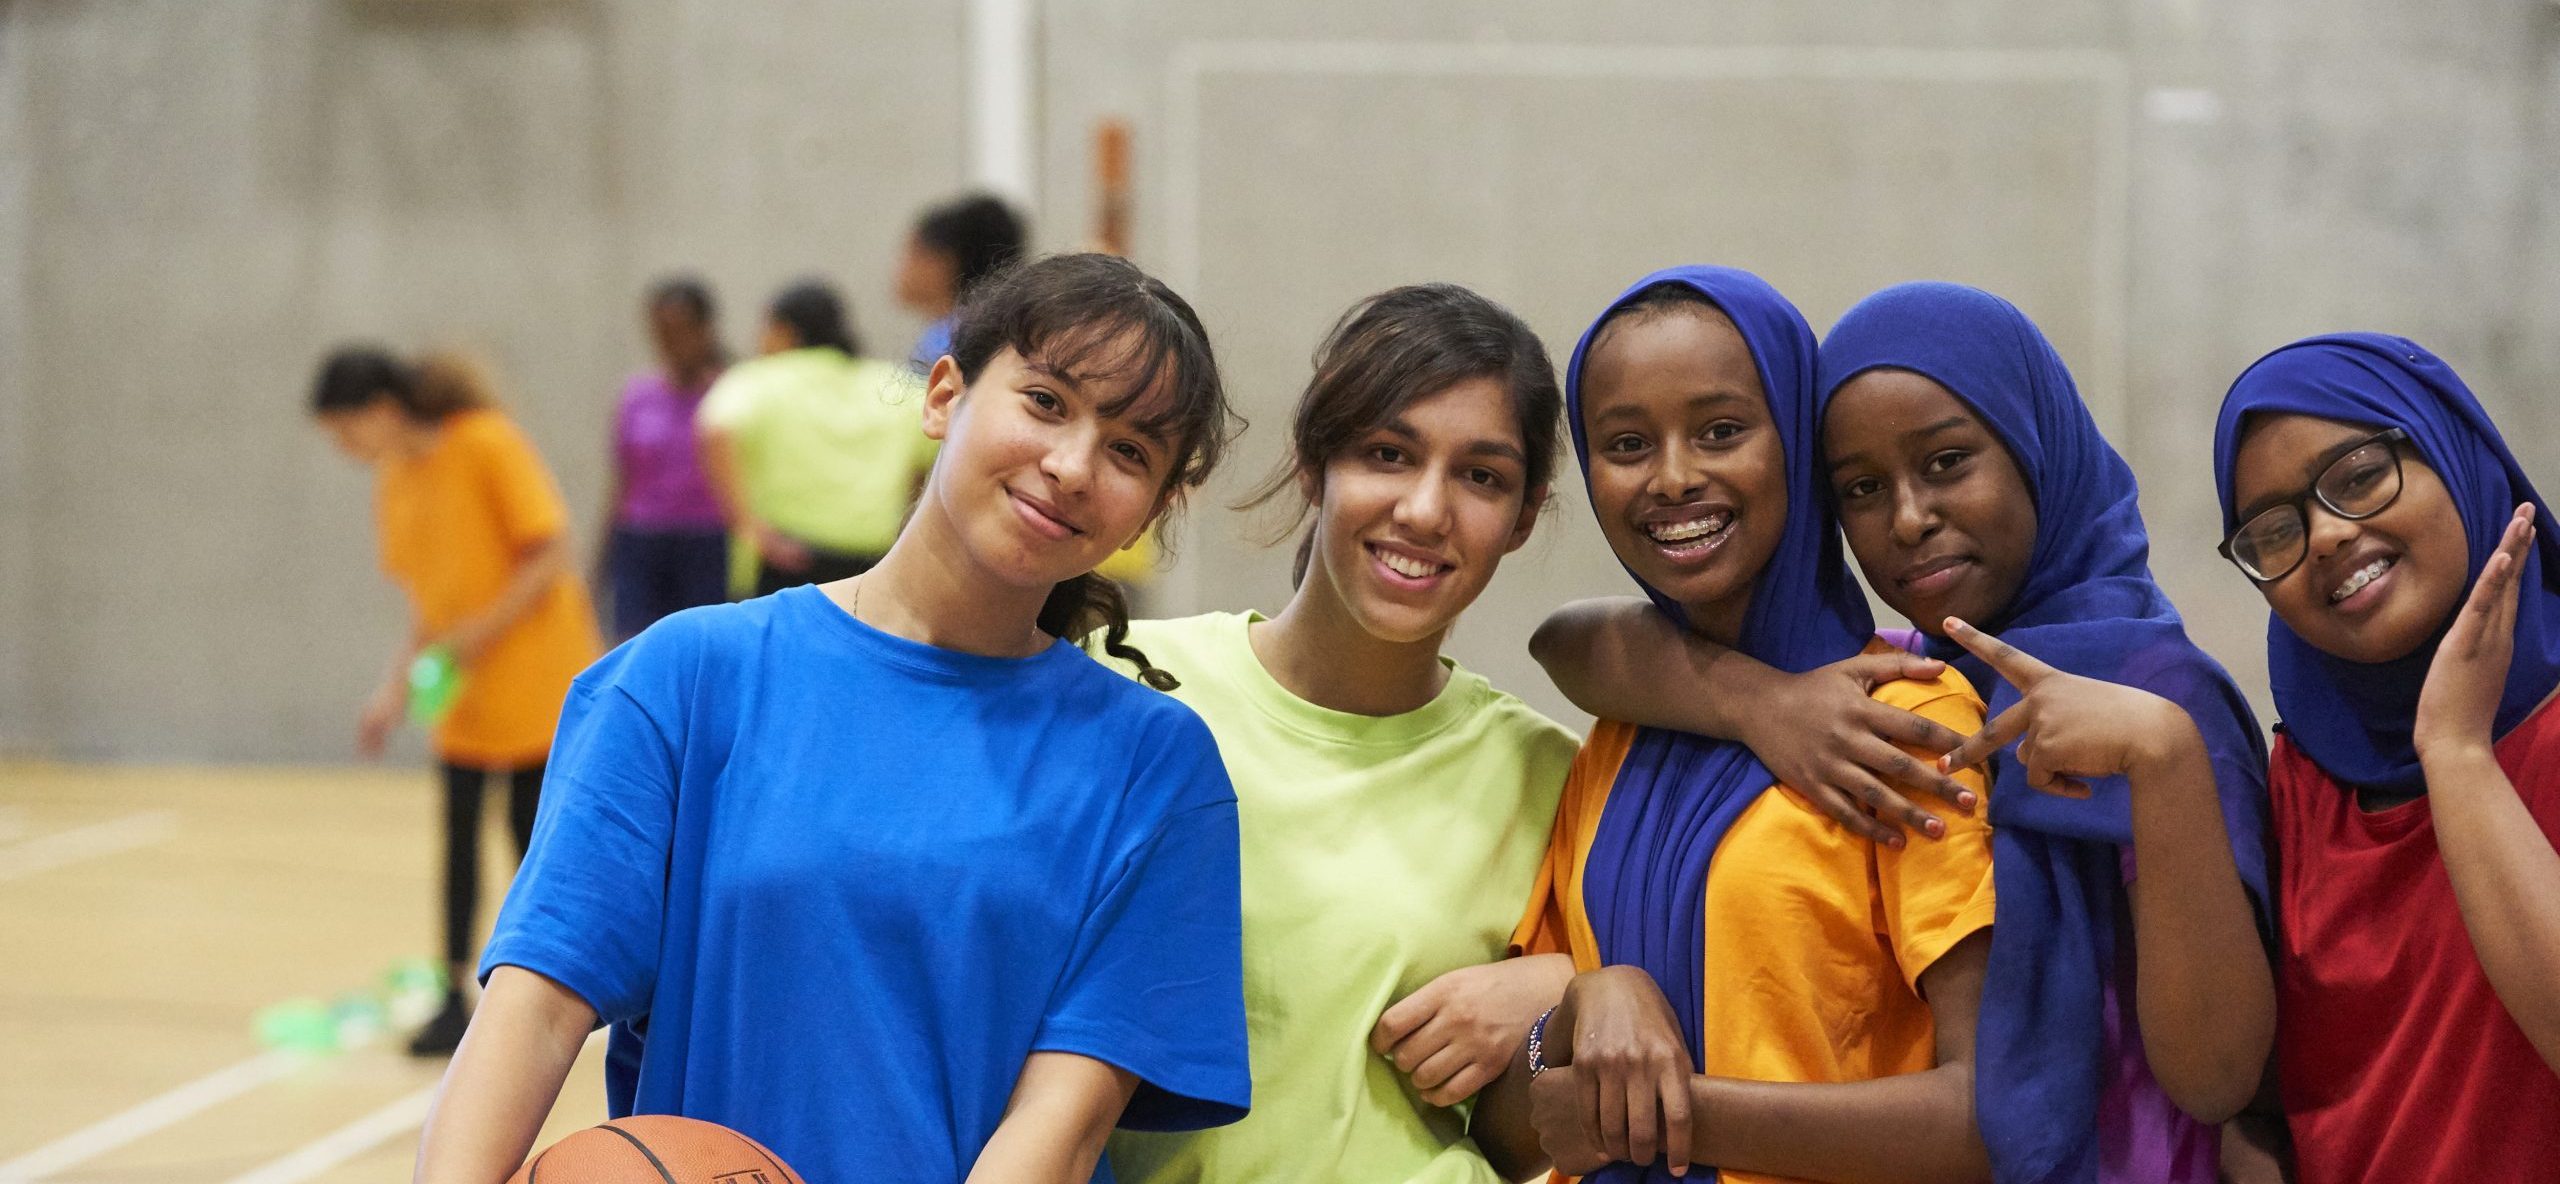 A group of teenage girls playing basketball at school